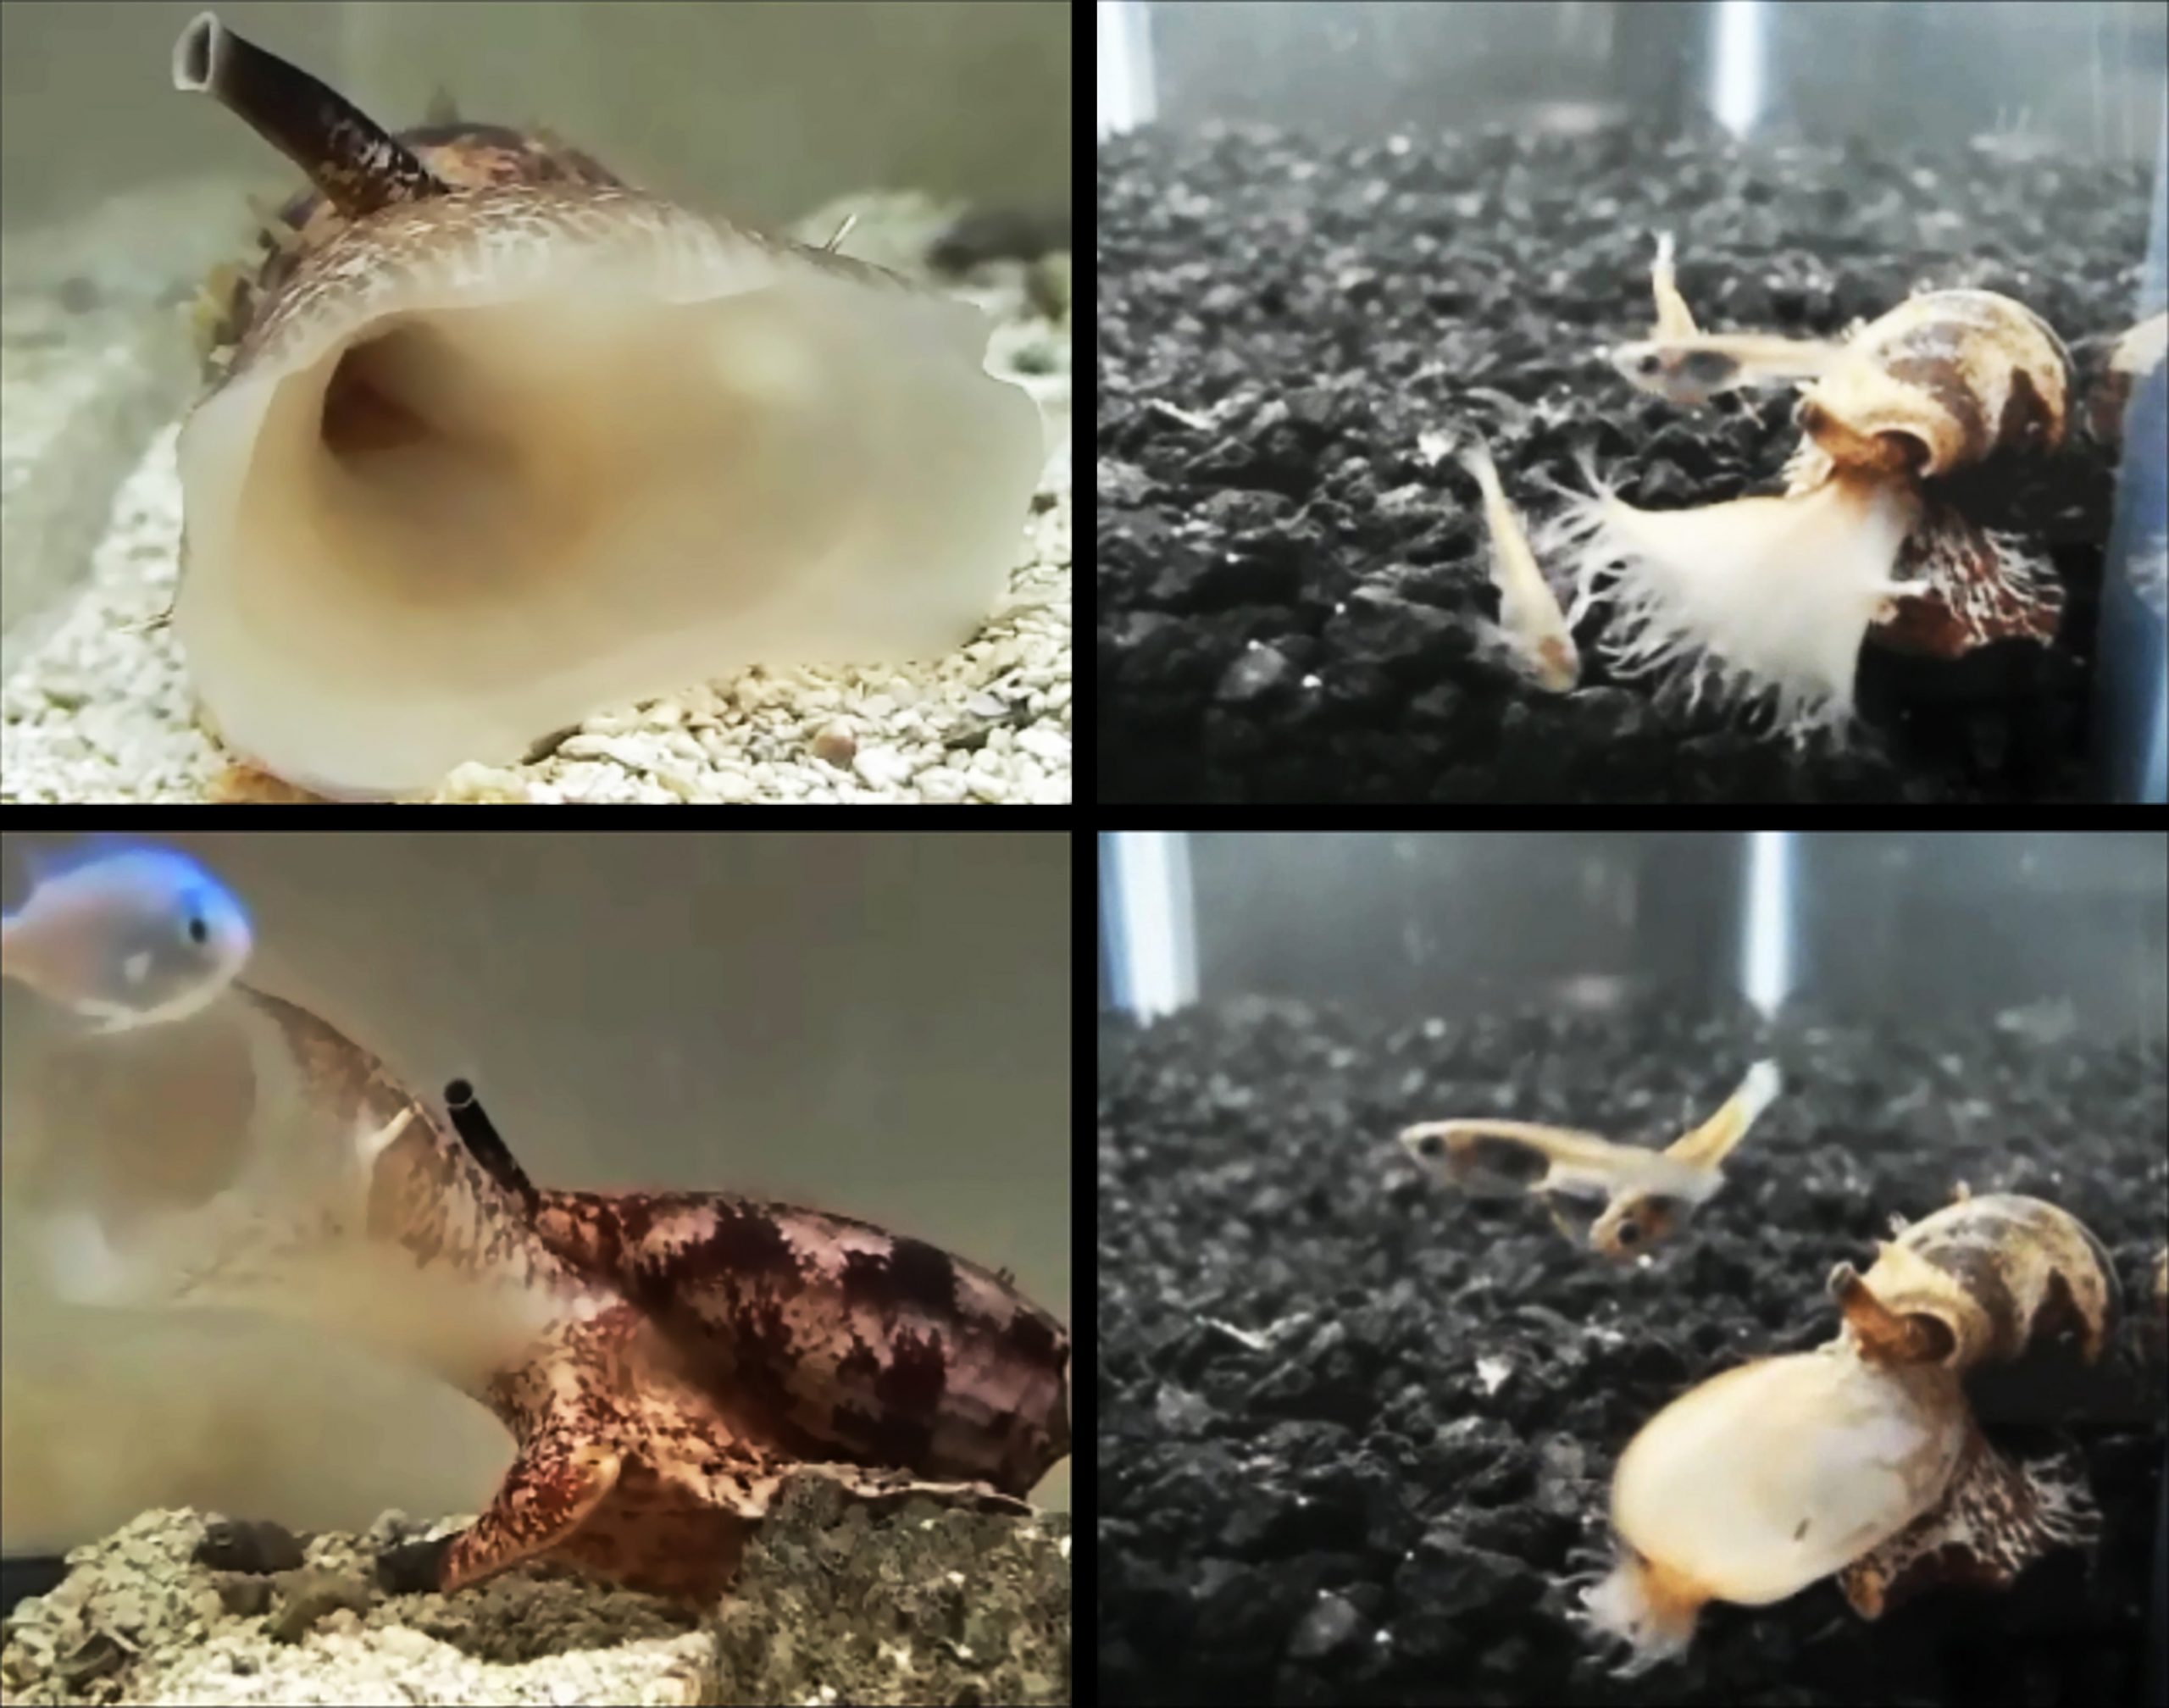 The images show two species of cone snail, Conus geographus (left) and Conus tulipa (right) attempting to capture their fish prey. As the snails approach, they release a specialized insulin into the water, along with neurotoxins that inhibit sensory circuits, resulting in hypoglycemic, sensory-deprived fish that are easier to engulf with their large, distensible false mouths. Once engulfed, powerful paralytic toxins are injected by the snail into each fish.